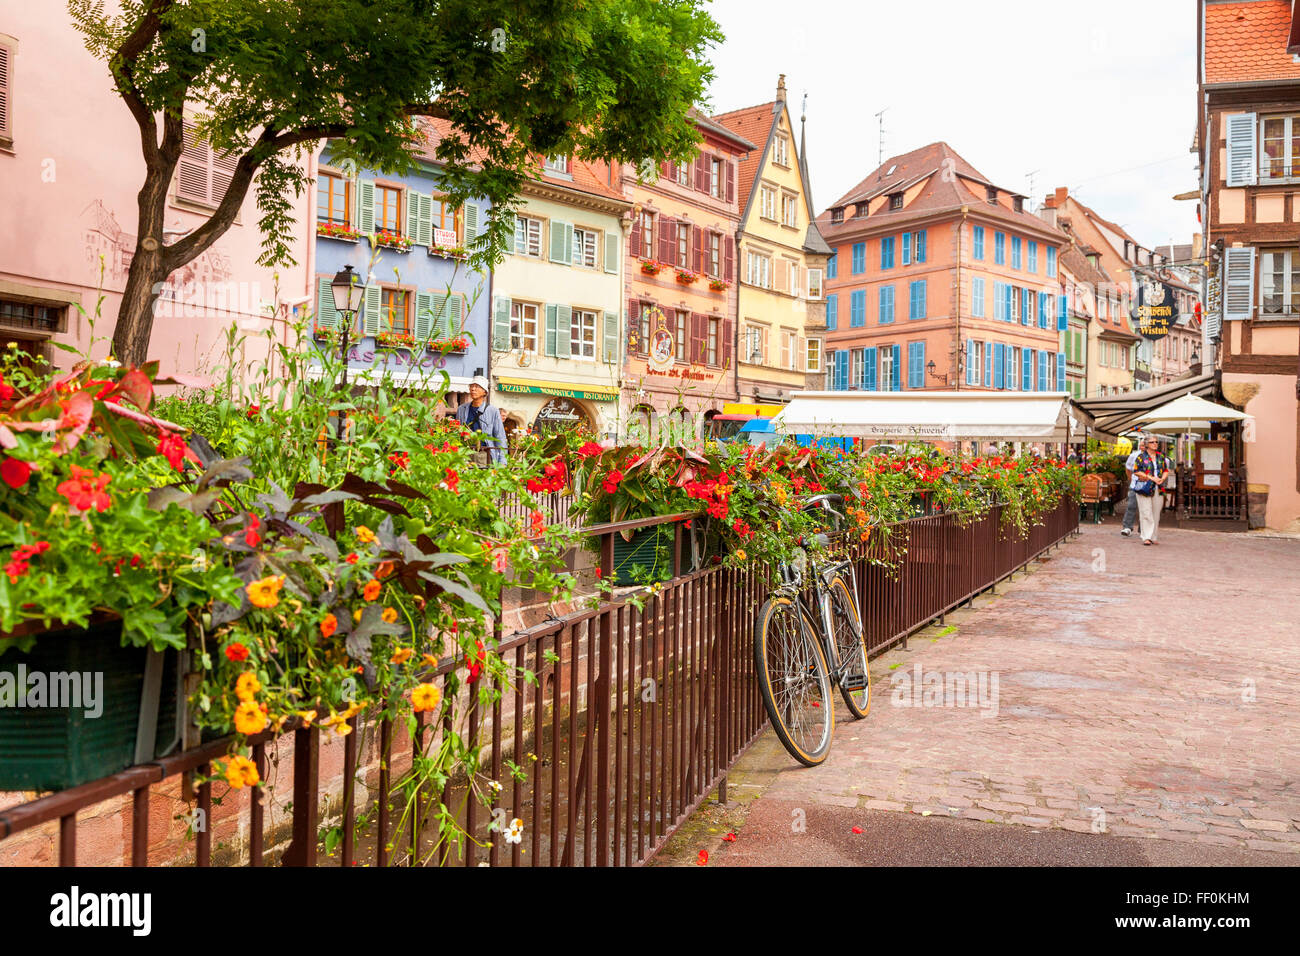 Typical houses at the old town, Colmar, Alsace, Haut-Rhin, France, Europe Stock Photo